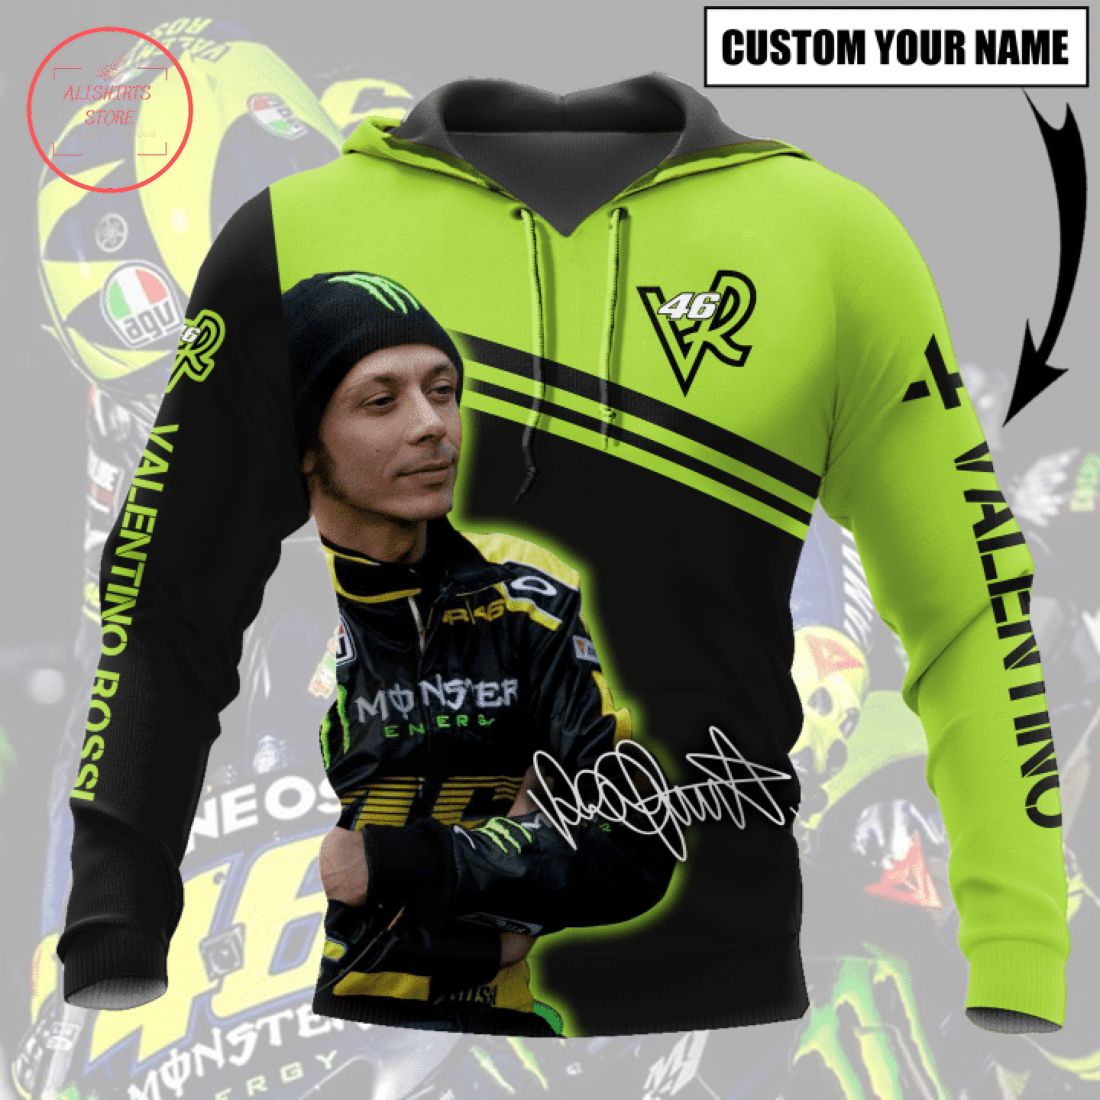 Personalized 46 Valentino Rossi Racing Team 3d Shirts